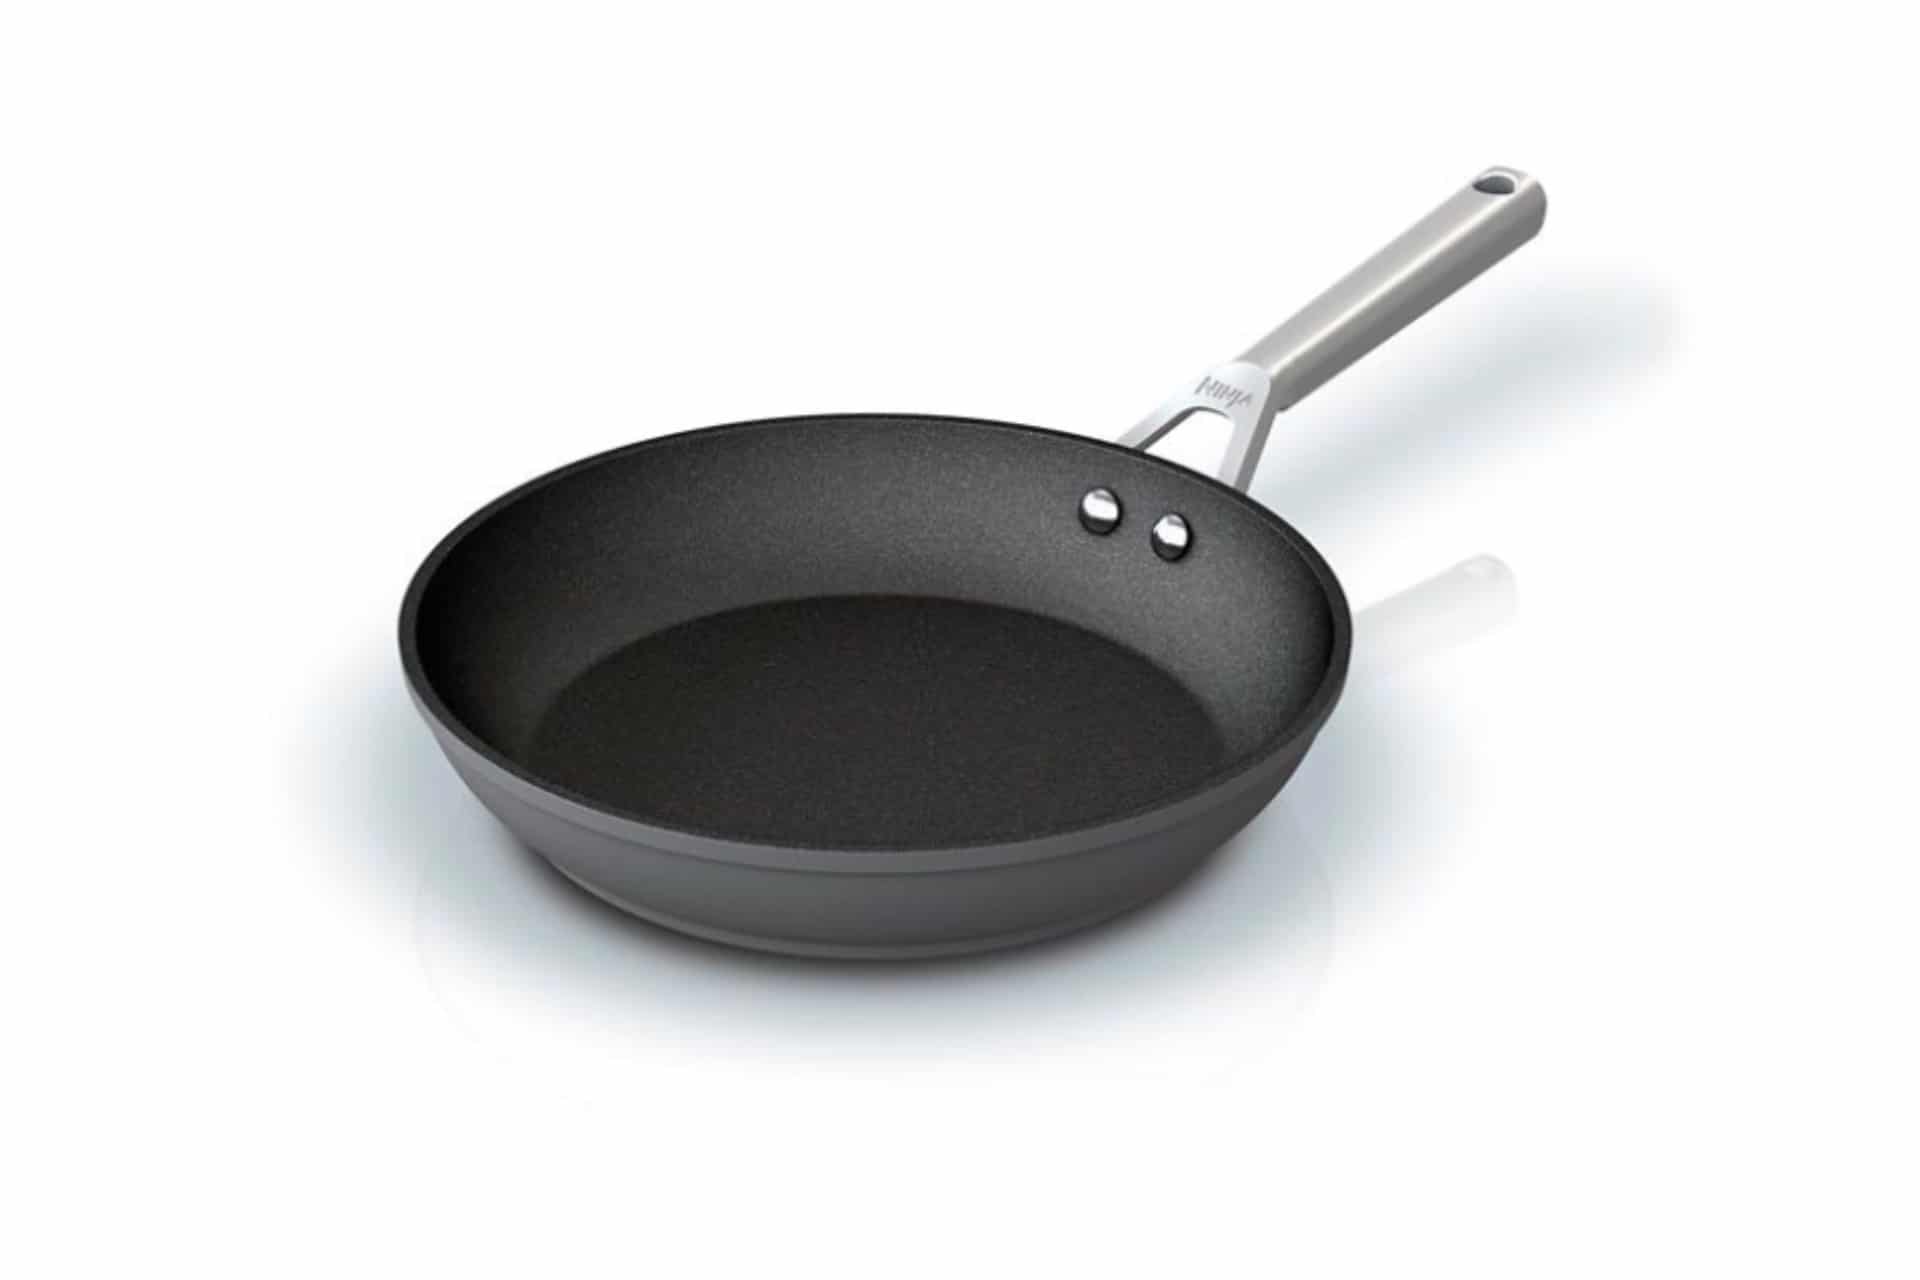 nonstick frying pan with stainless steel handle on a white background